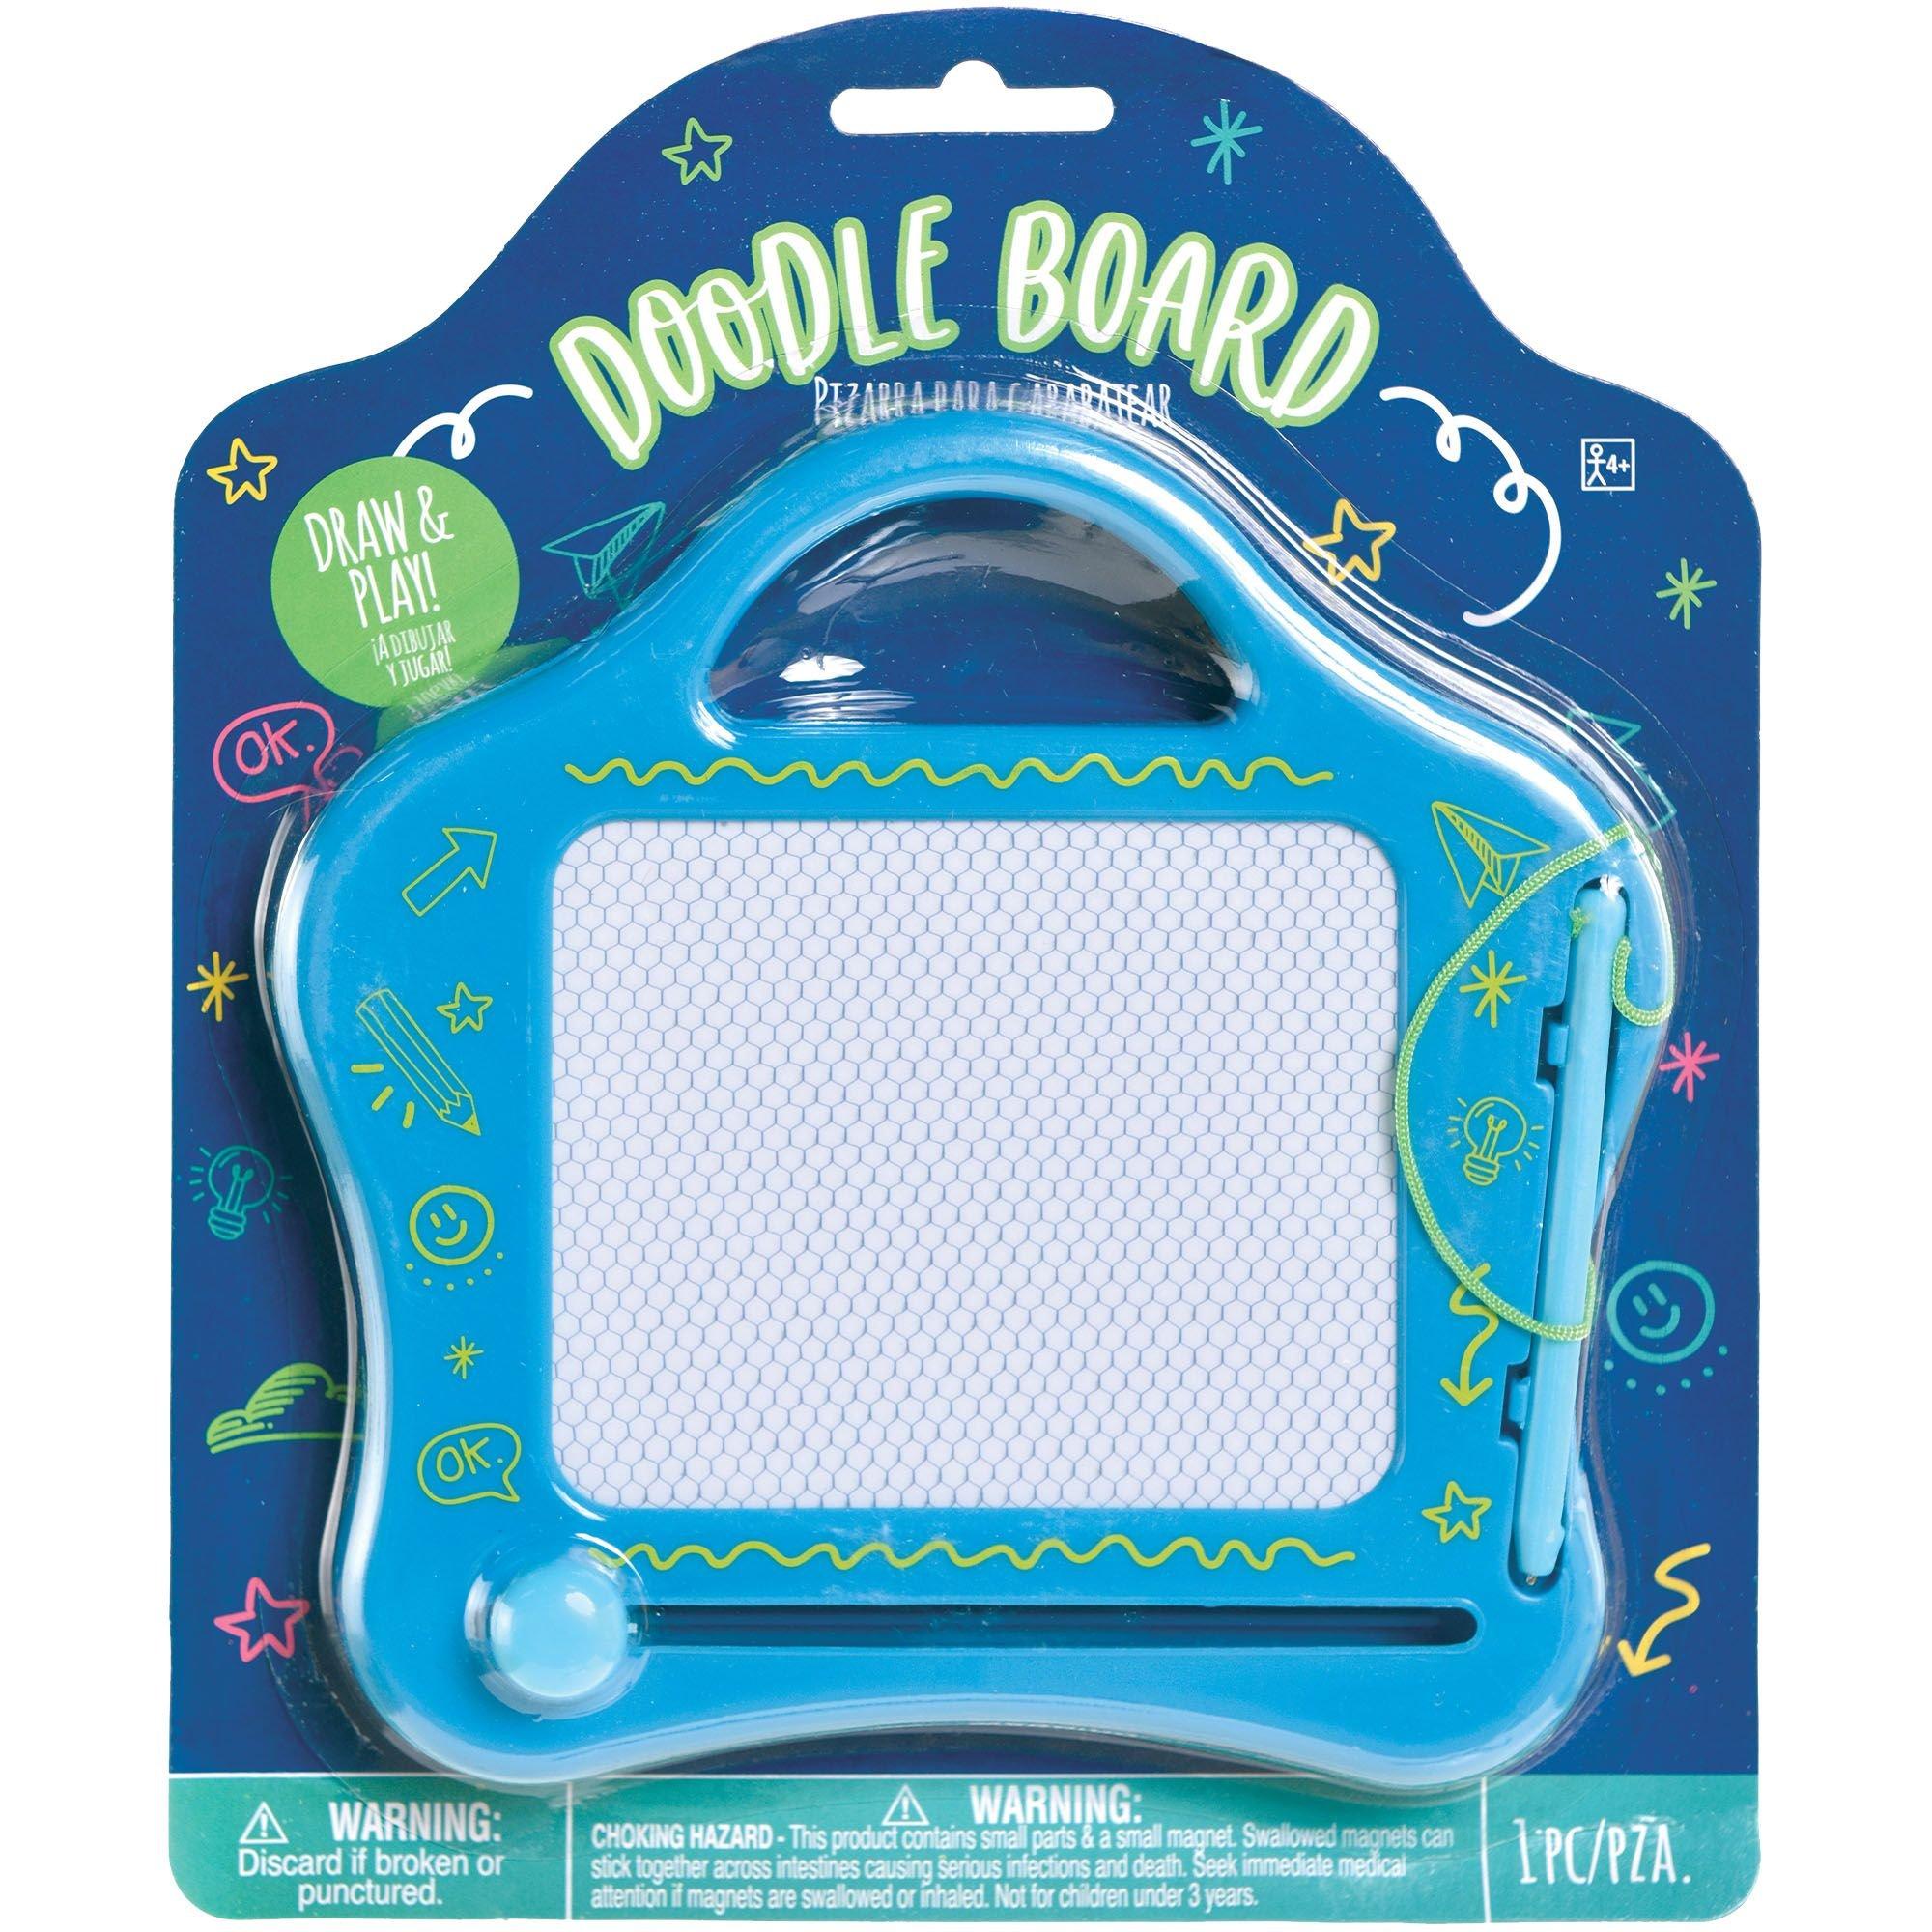 Colorful Doodle Board, Children's Magnetic Drawing Board Set